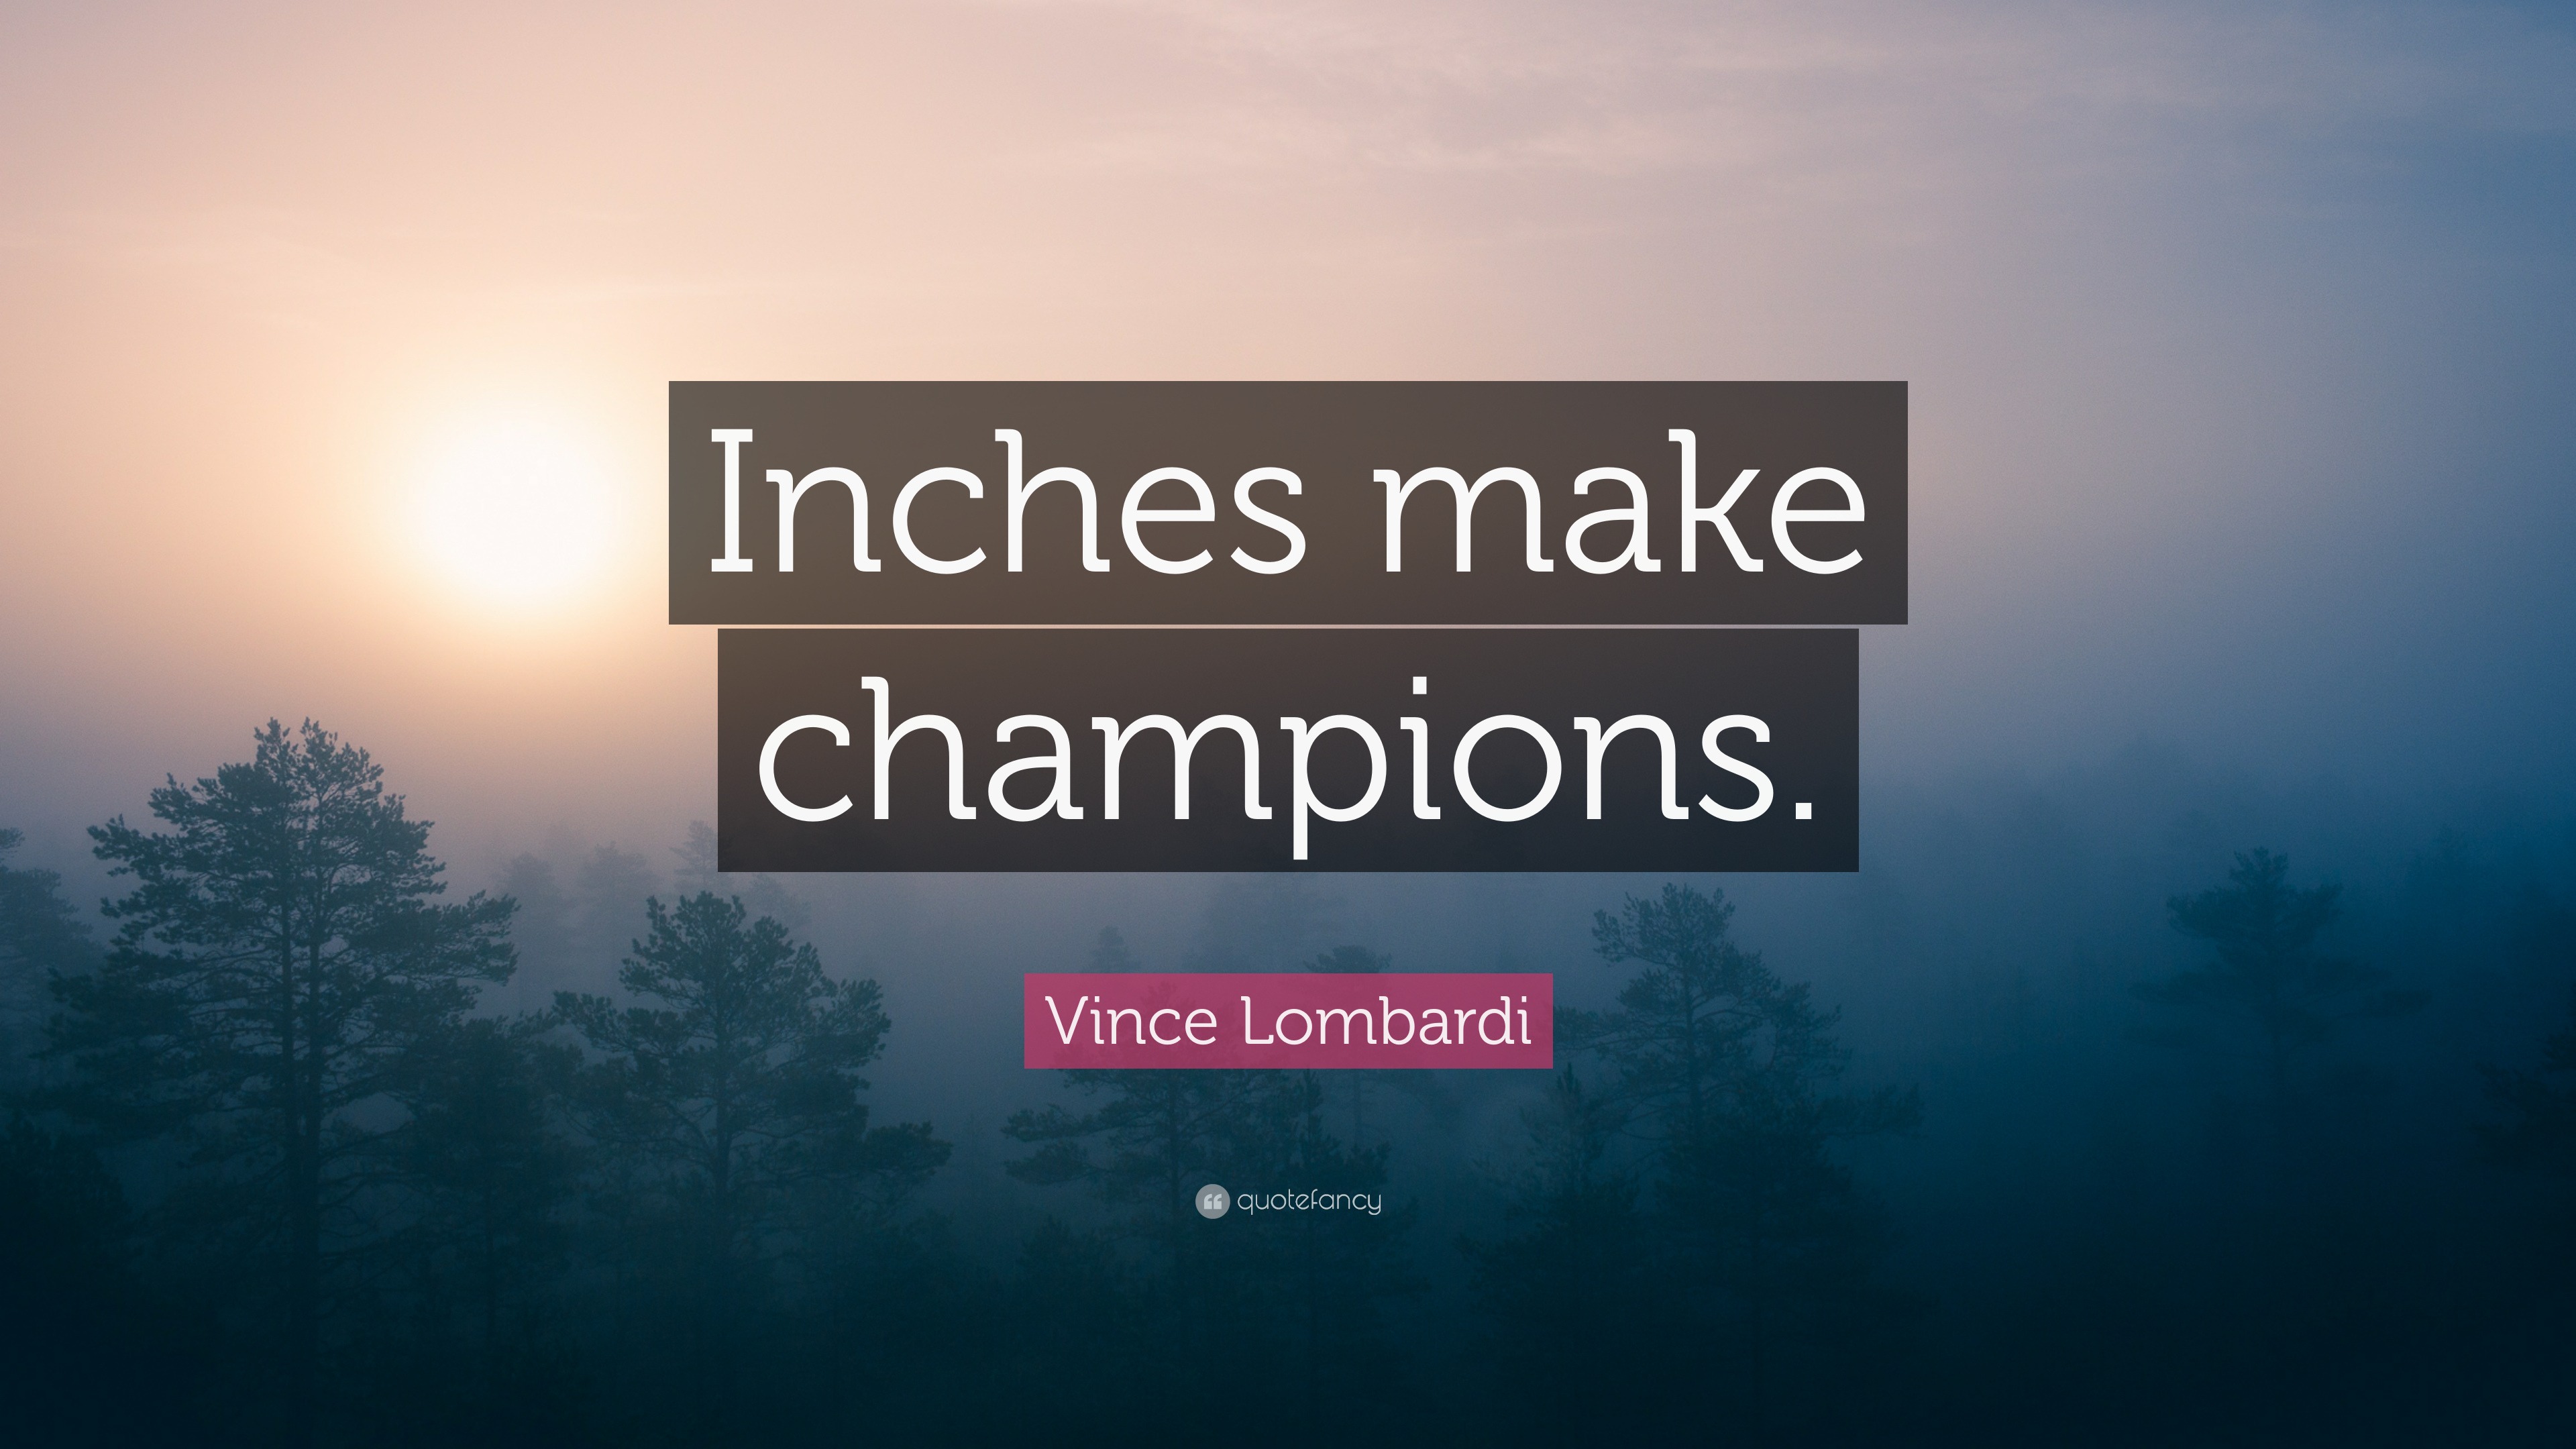 Vince Lombardi Quote: “Inches make champions.” (12 wallpapers) - Quotefancy